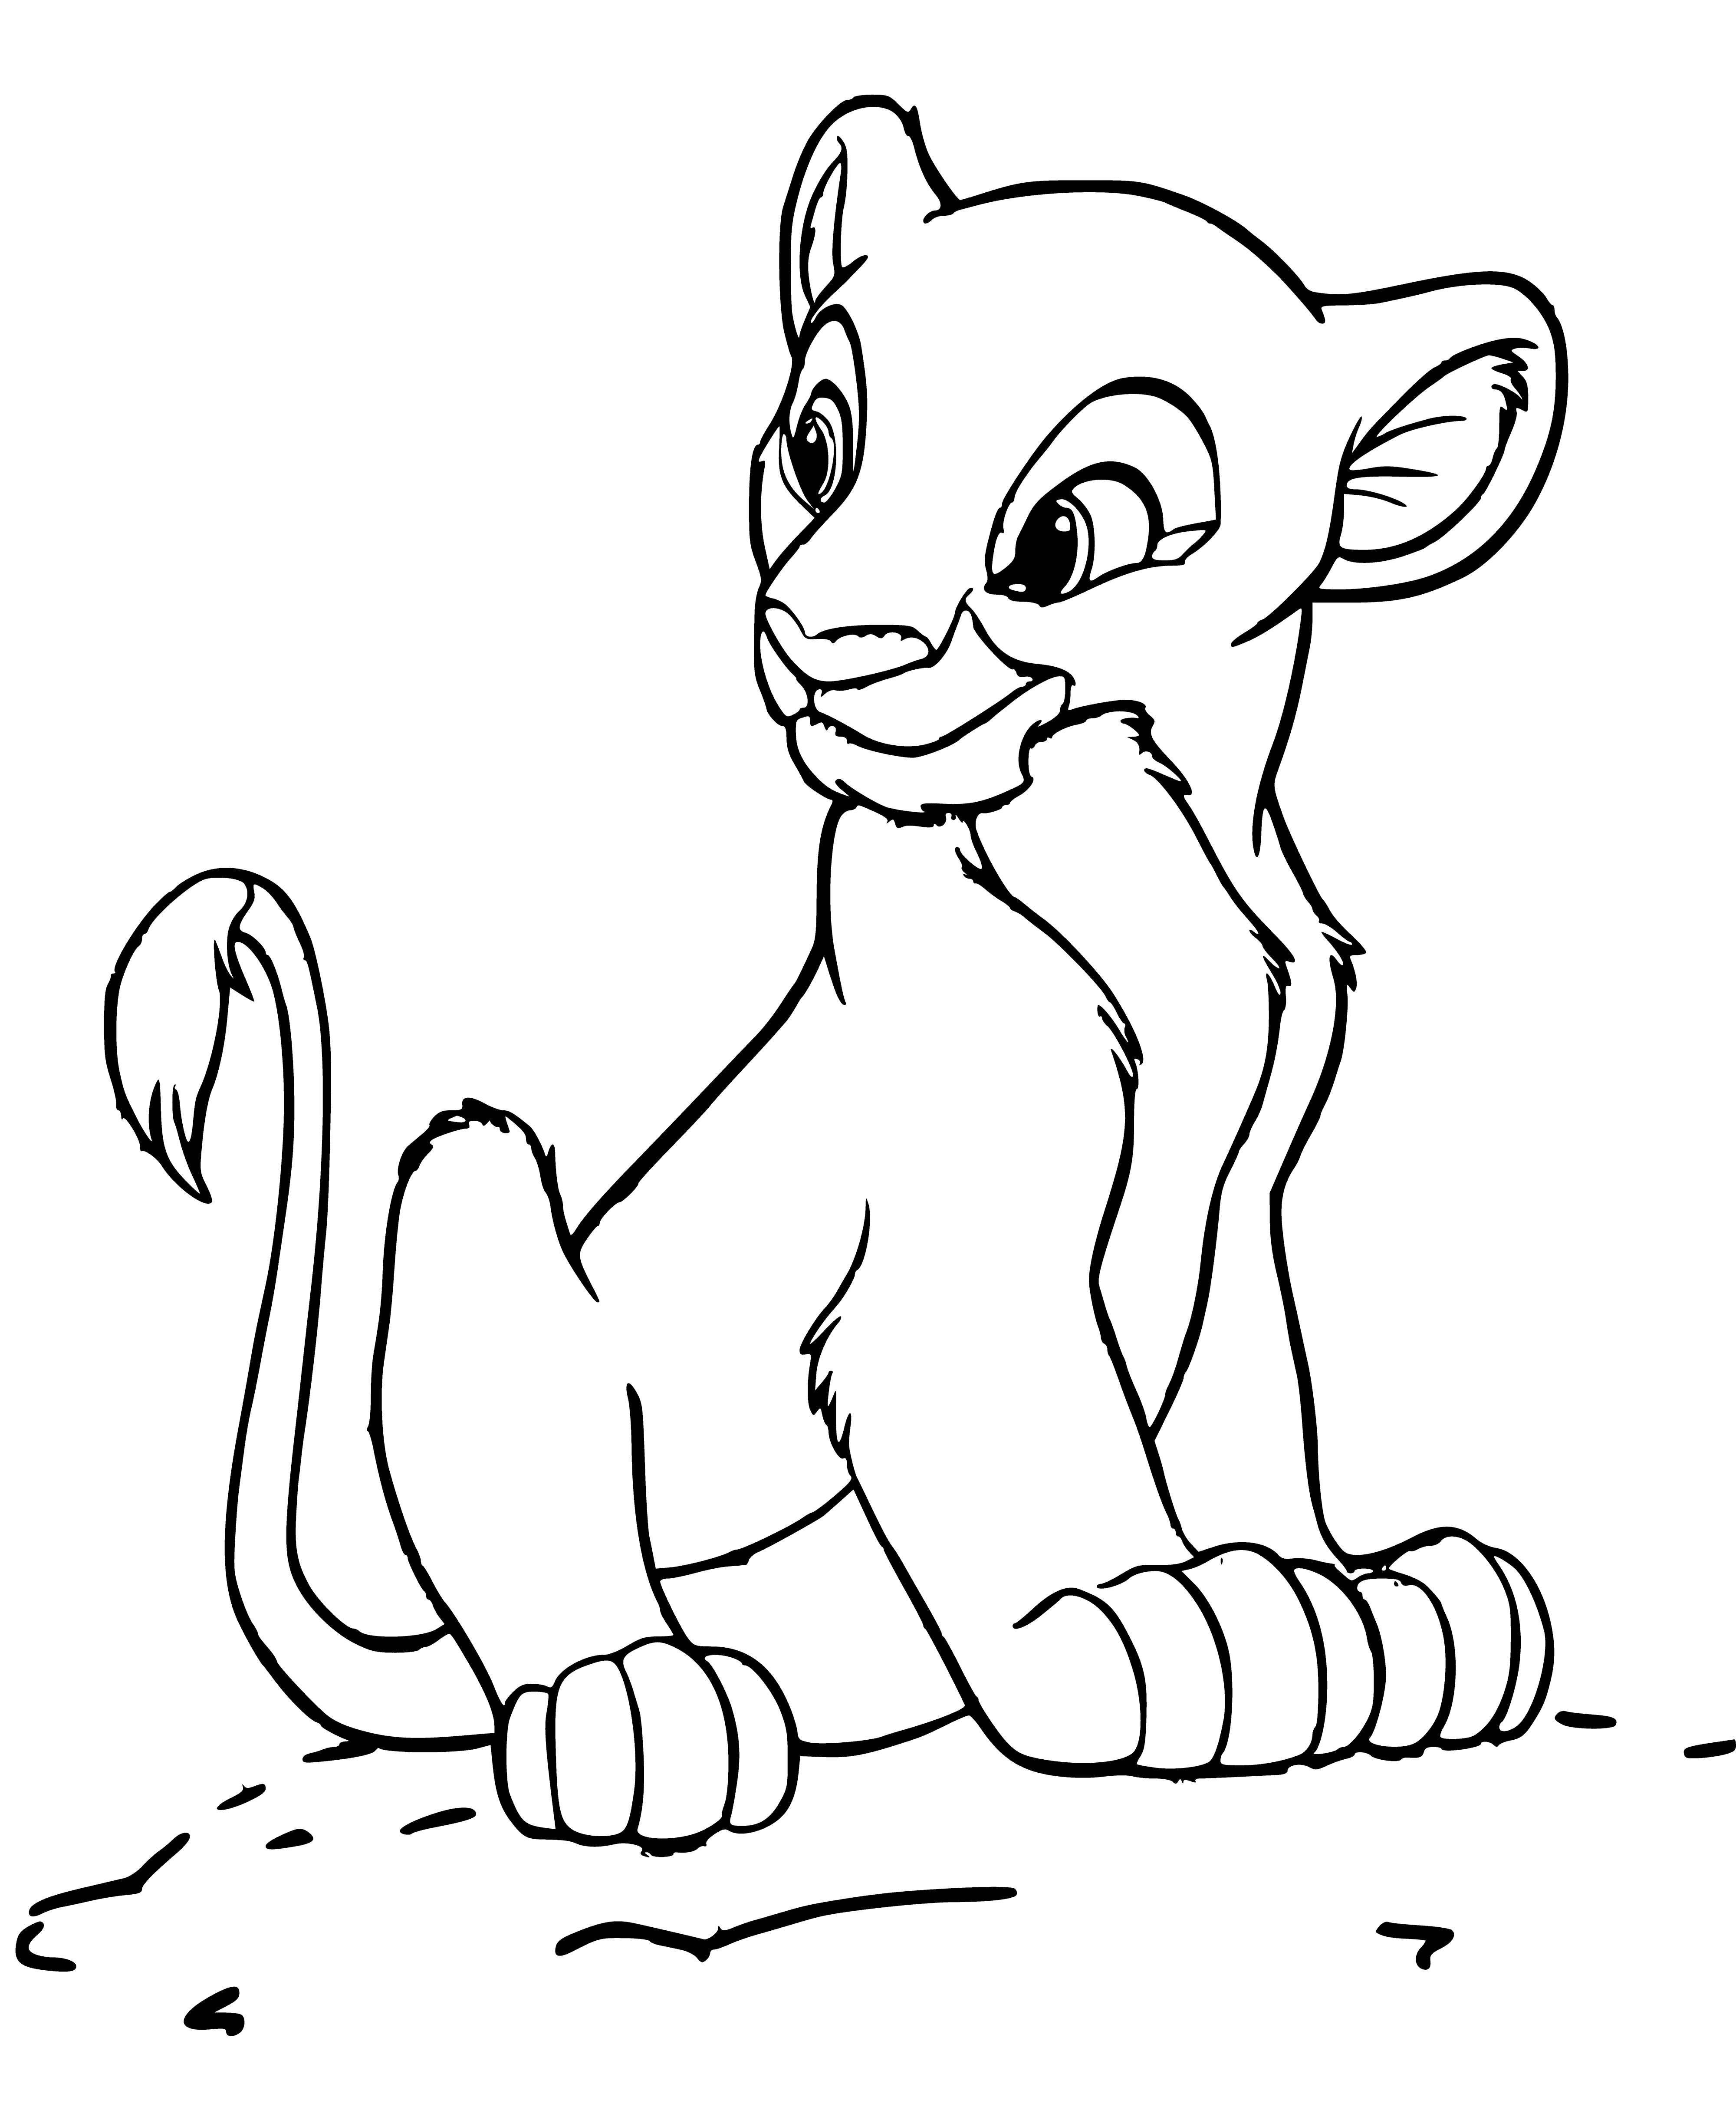 coloring page: Lioness stands on rock in savanna, light brown coat, reddish mane; looking to side at something off-frame. #coloringpage